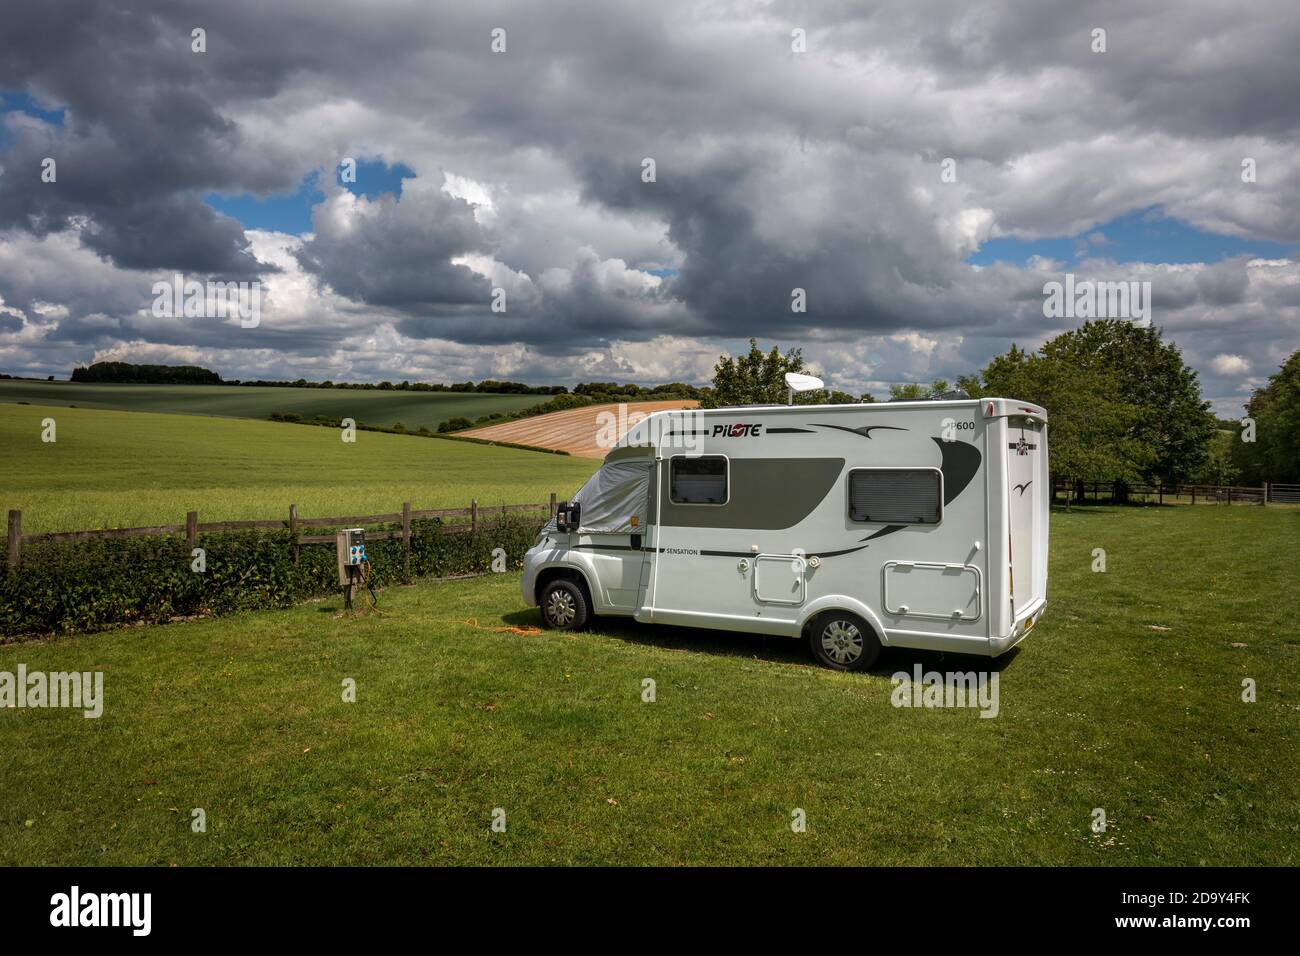 Pilote Motorhome; on a CL; Wiltshire; UK Stock Photo